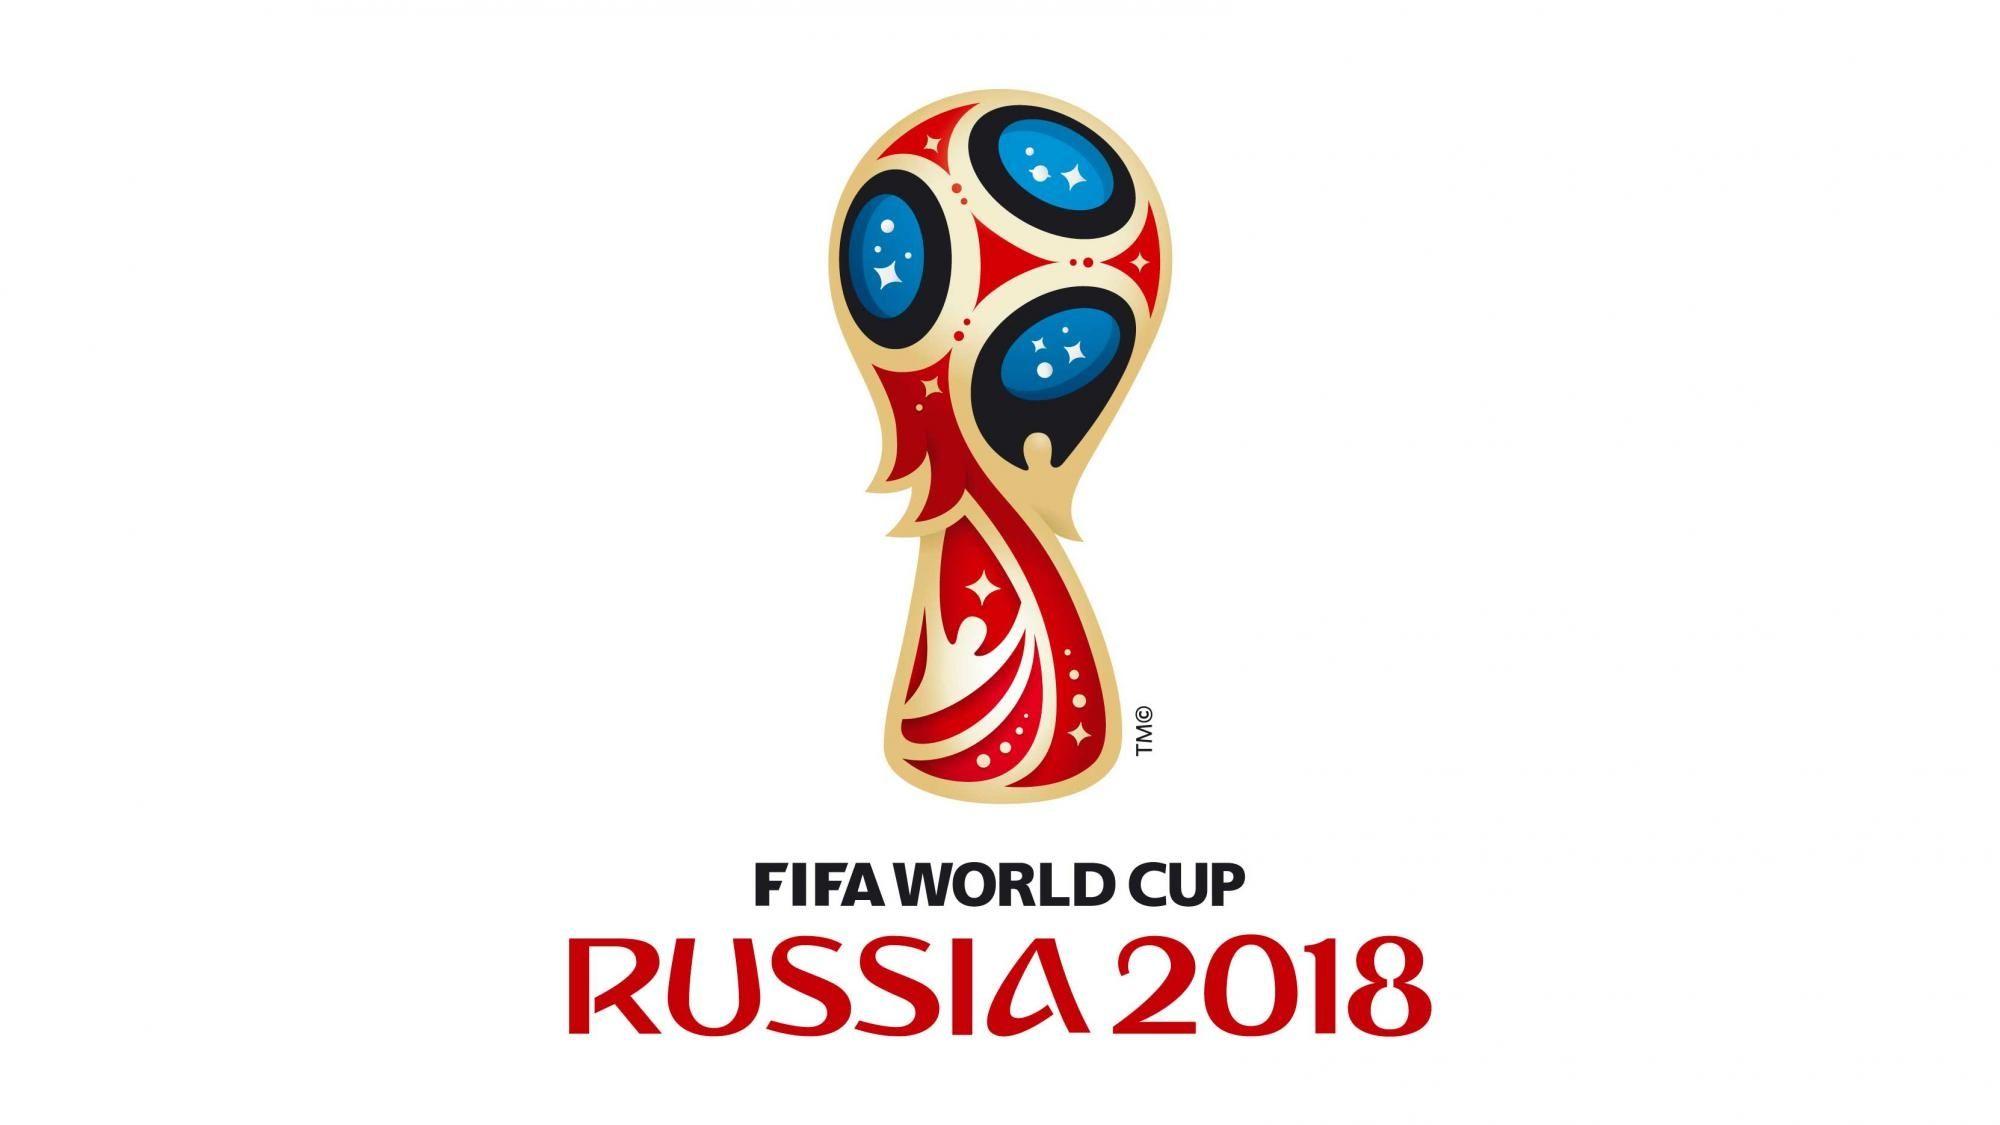 Russia 2018 World Cup wallpaper and picture of the World